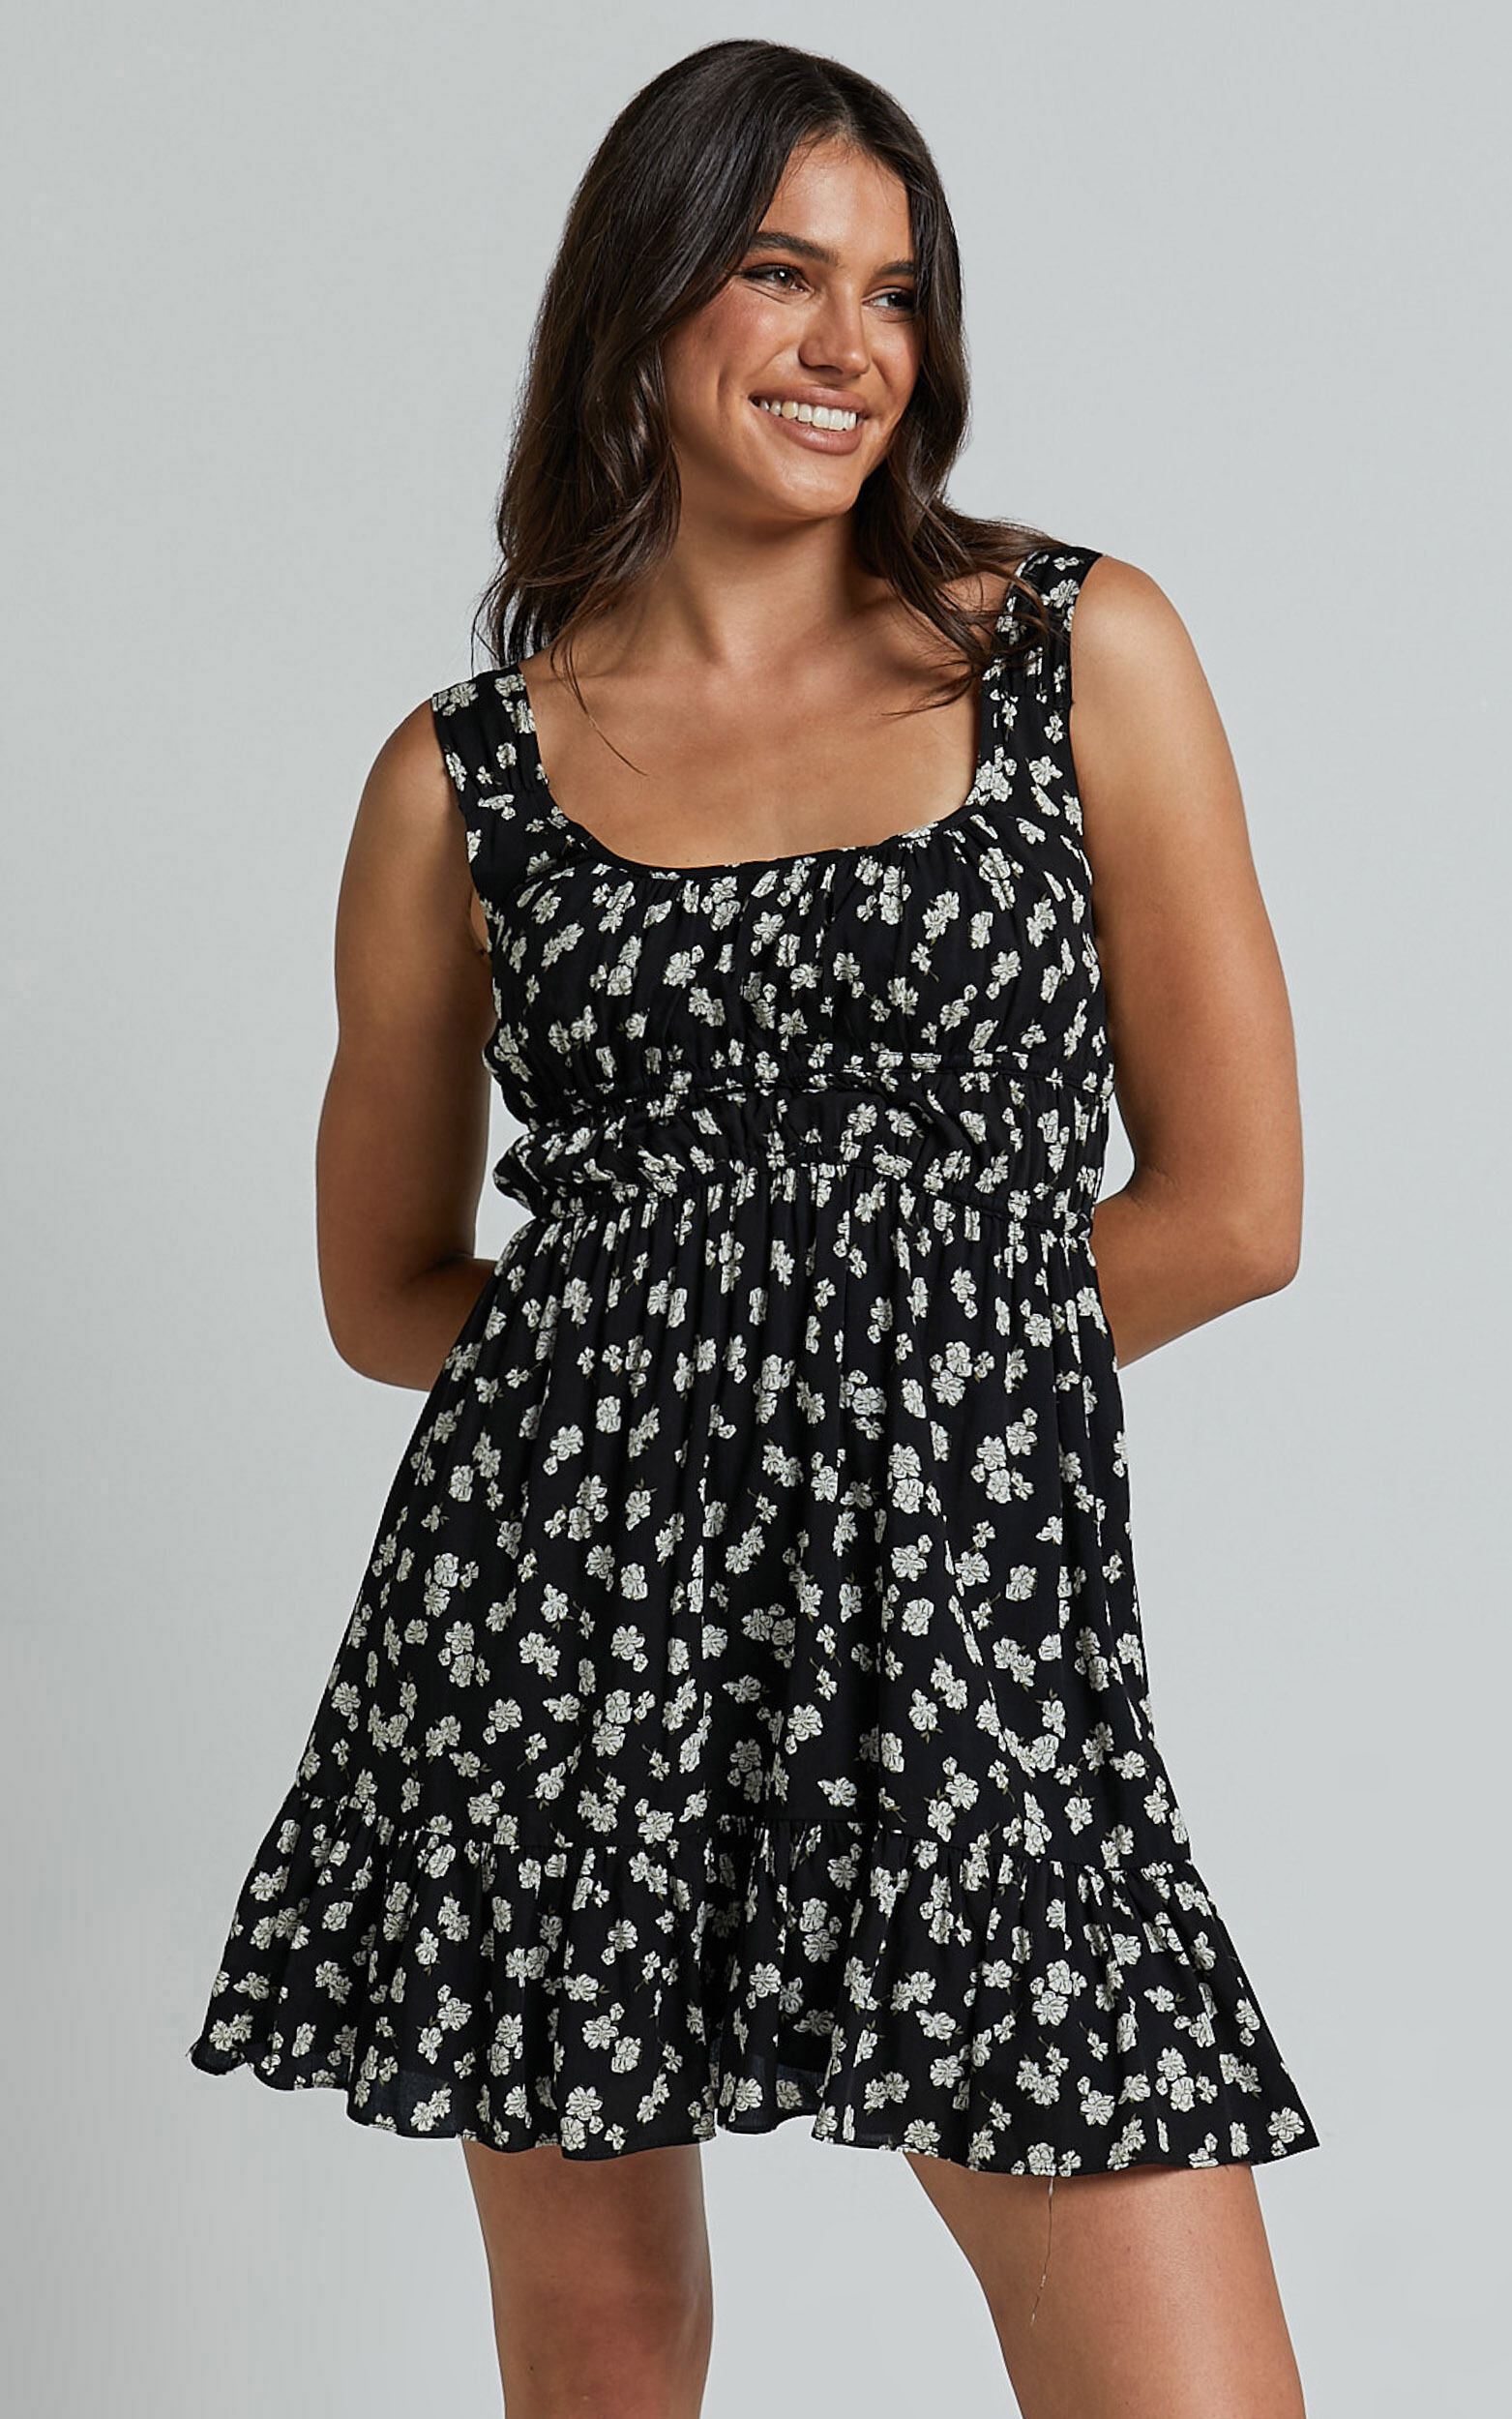 Gieanny Mini Dress - Scoop Neck Sleeveless Ruched Strap Ruffle Hem Dress in Black Floral - 06, BLK1